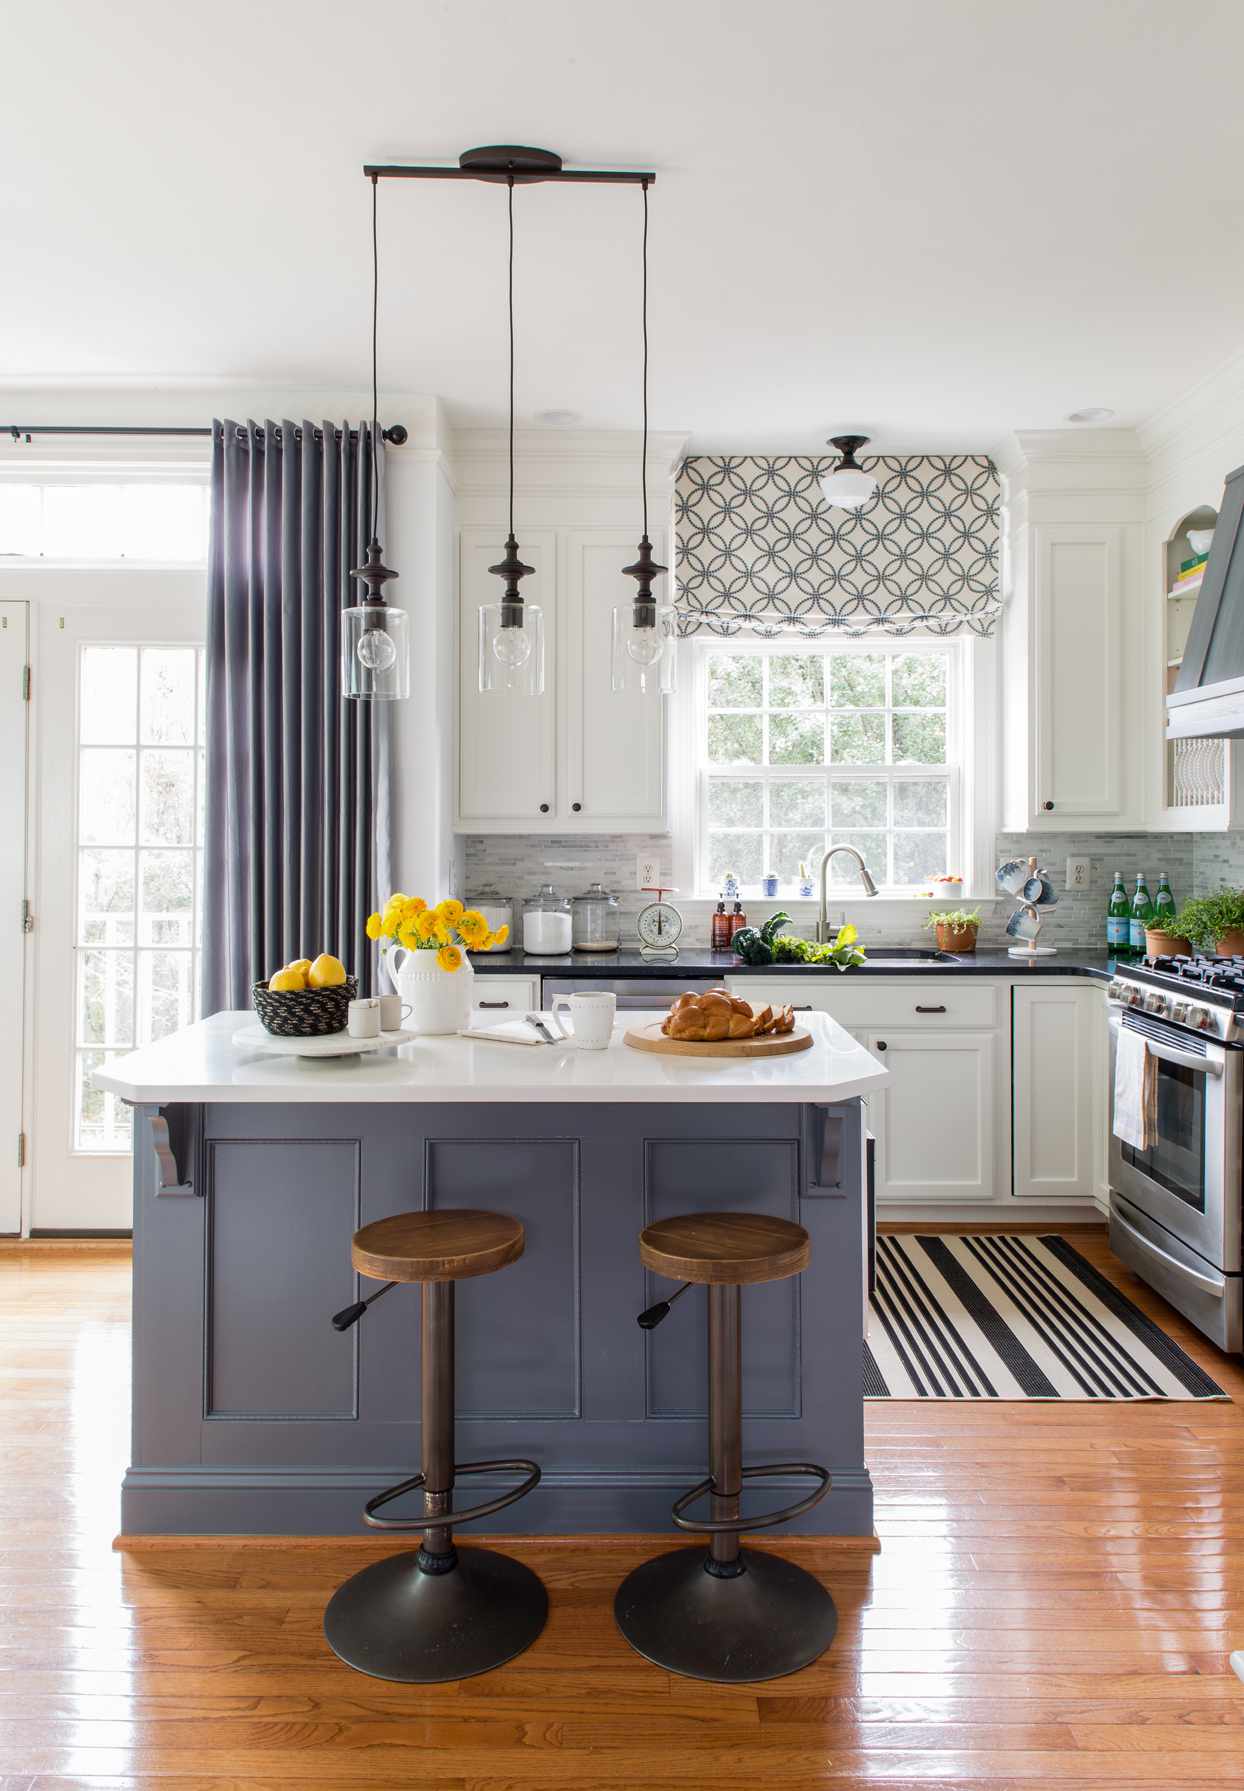 20 Contrasting Kitchen Island Ideas for a Stand Out Space   Better ...